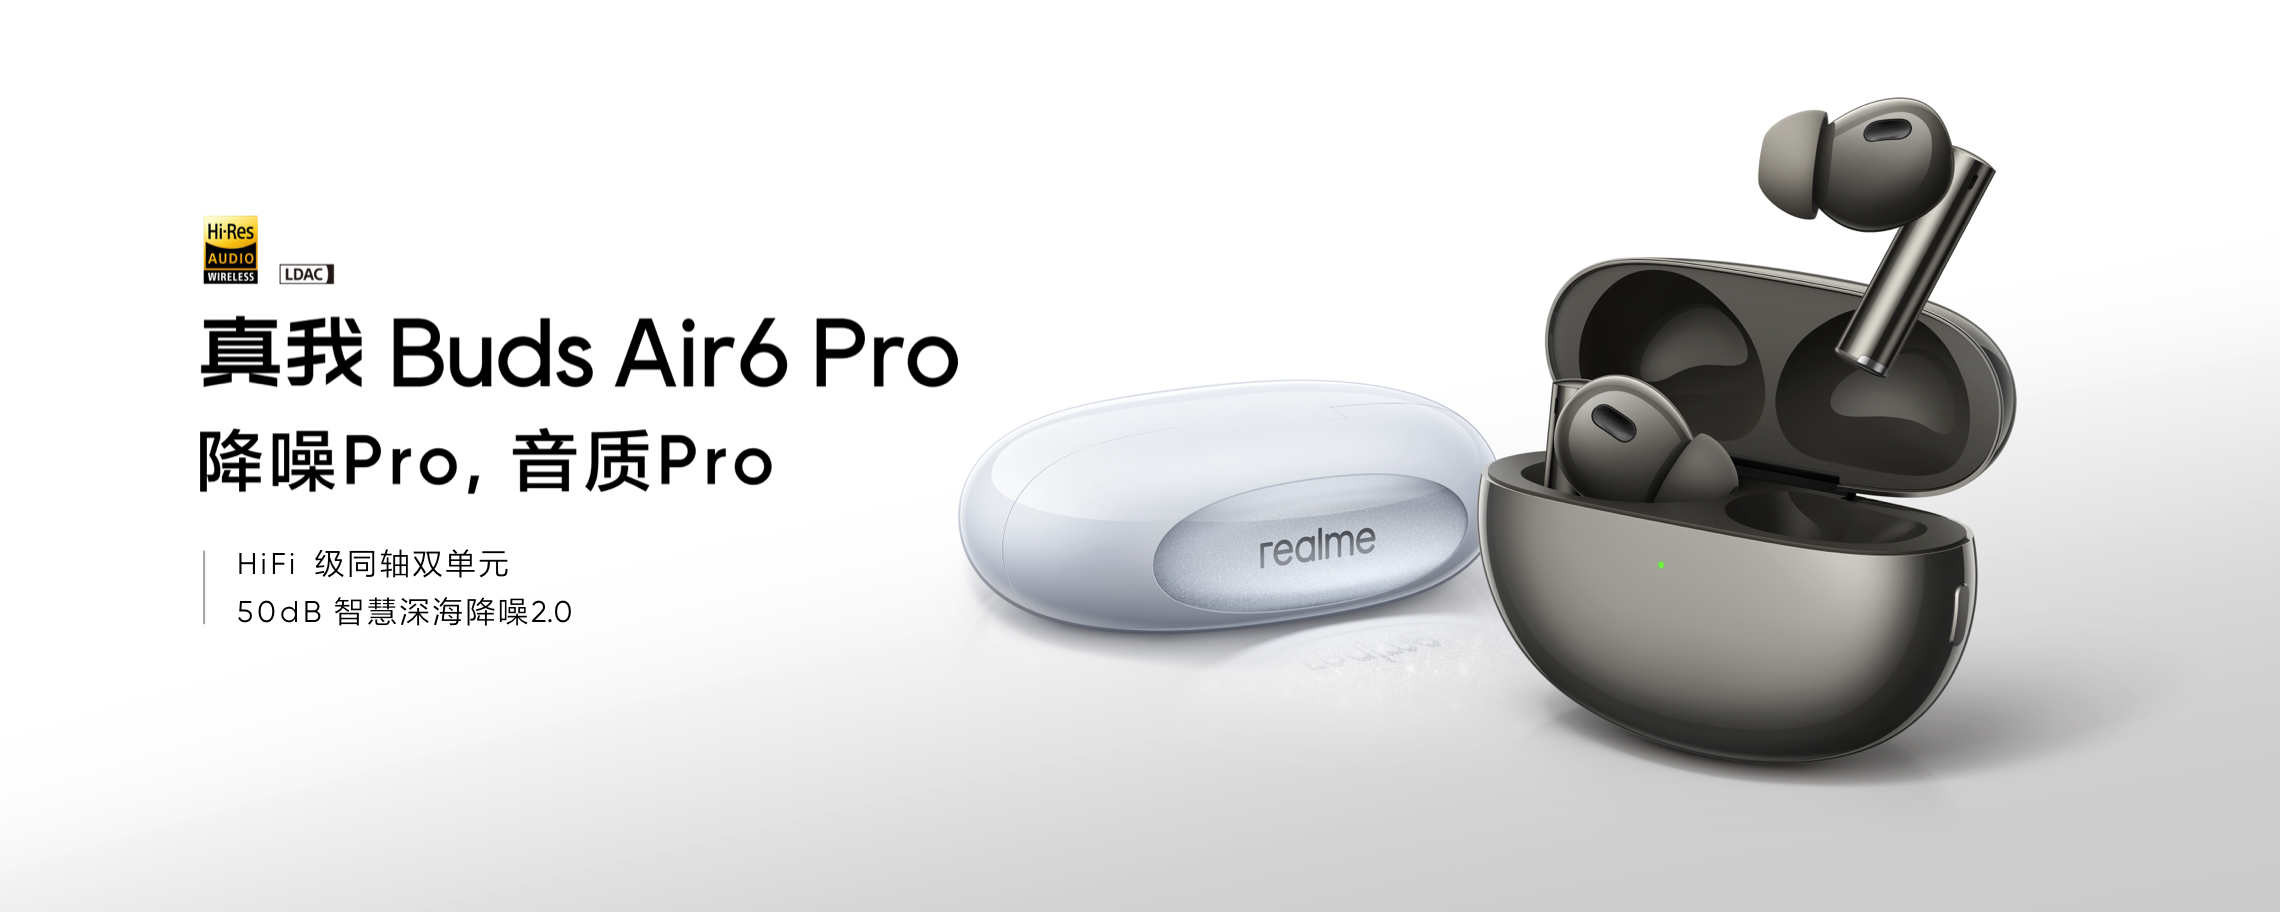 Realme Buds Air6 and Buds Air6 Pro TWS earphones debut